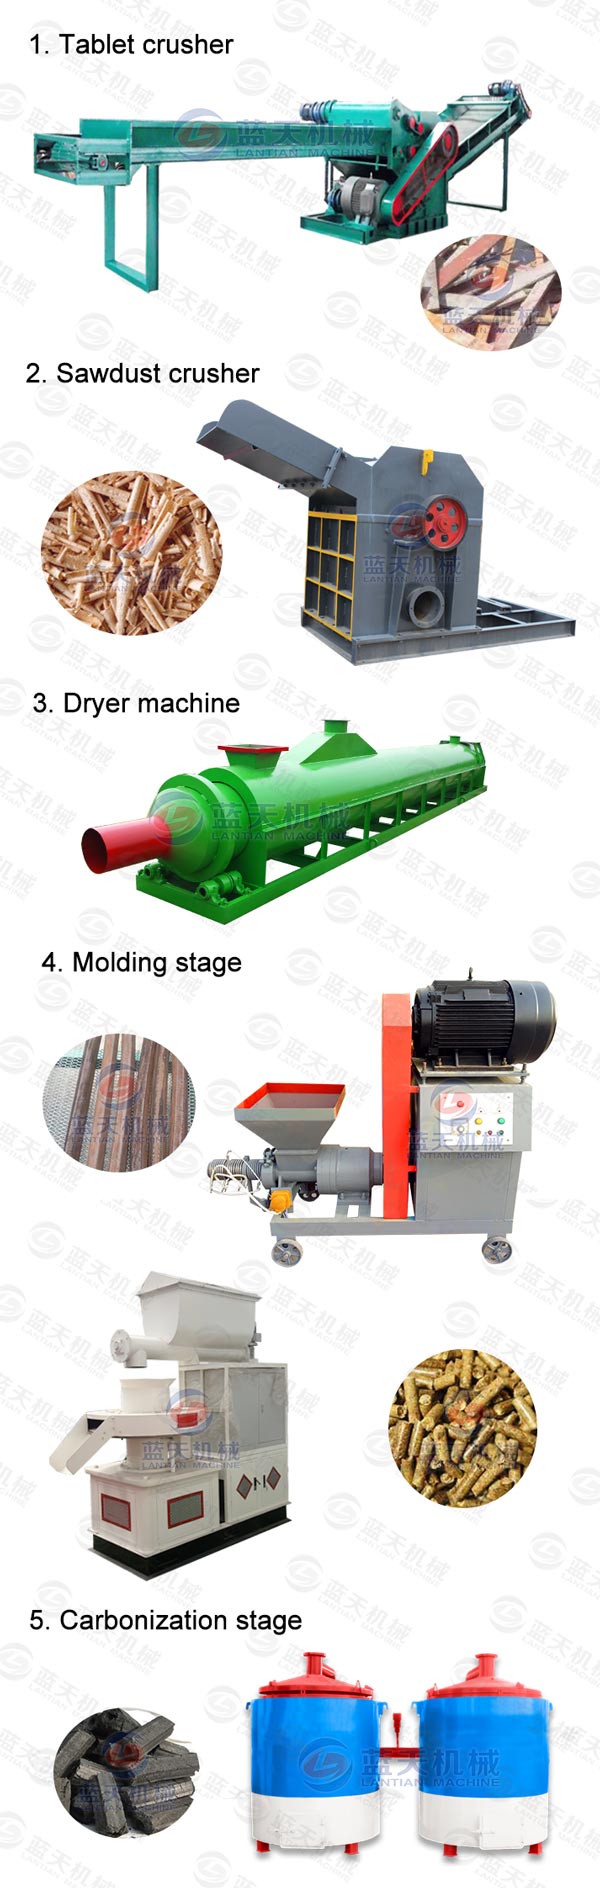 Production lines of tablet crusher